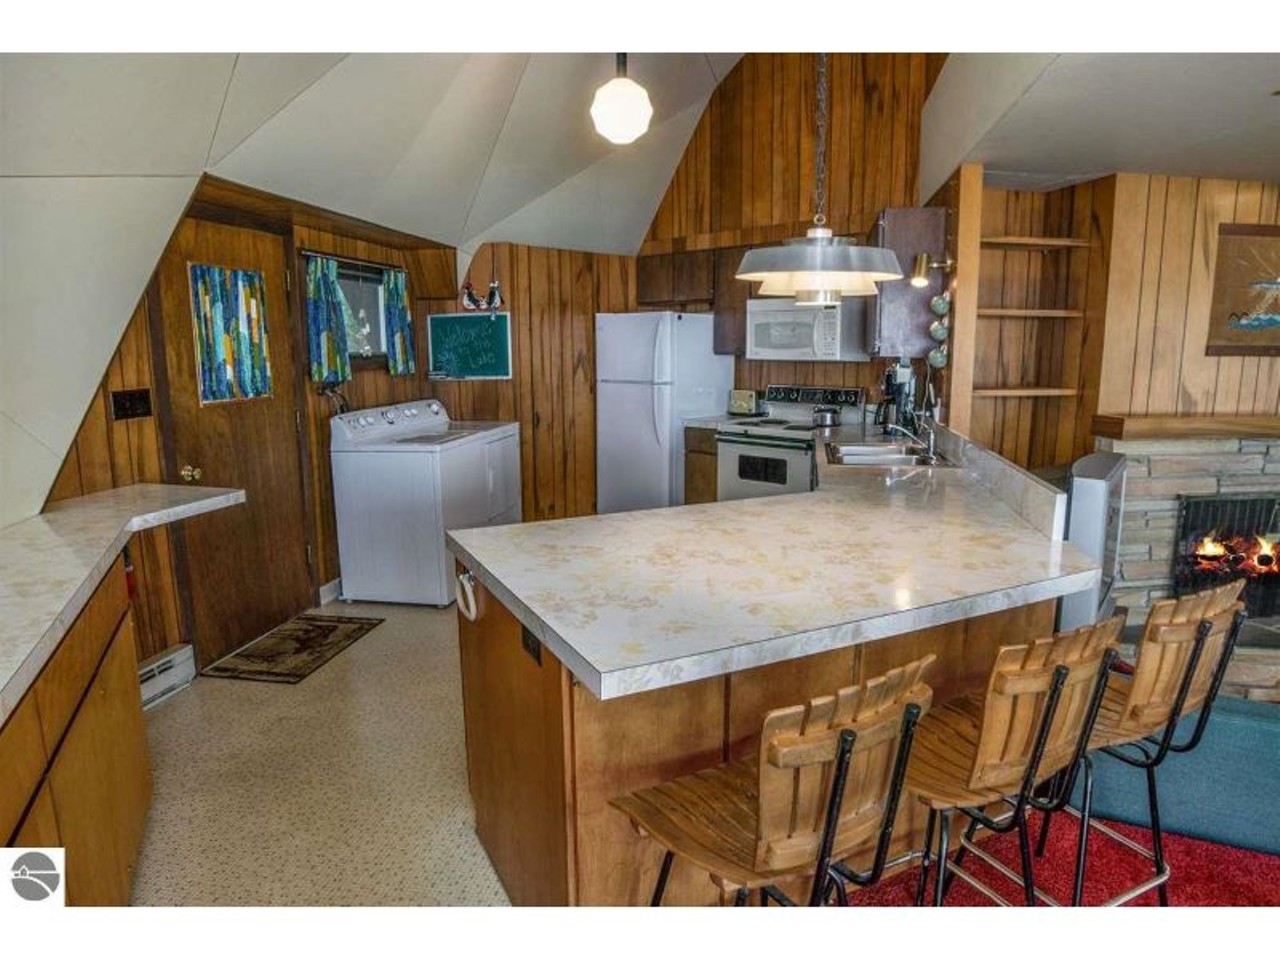 This mid-century dome home on Crystal Lake is a retro hideaway &#151;&nbsp;let's take a tour